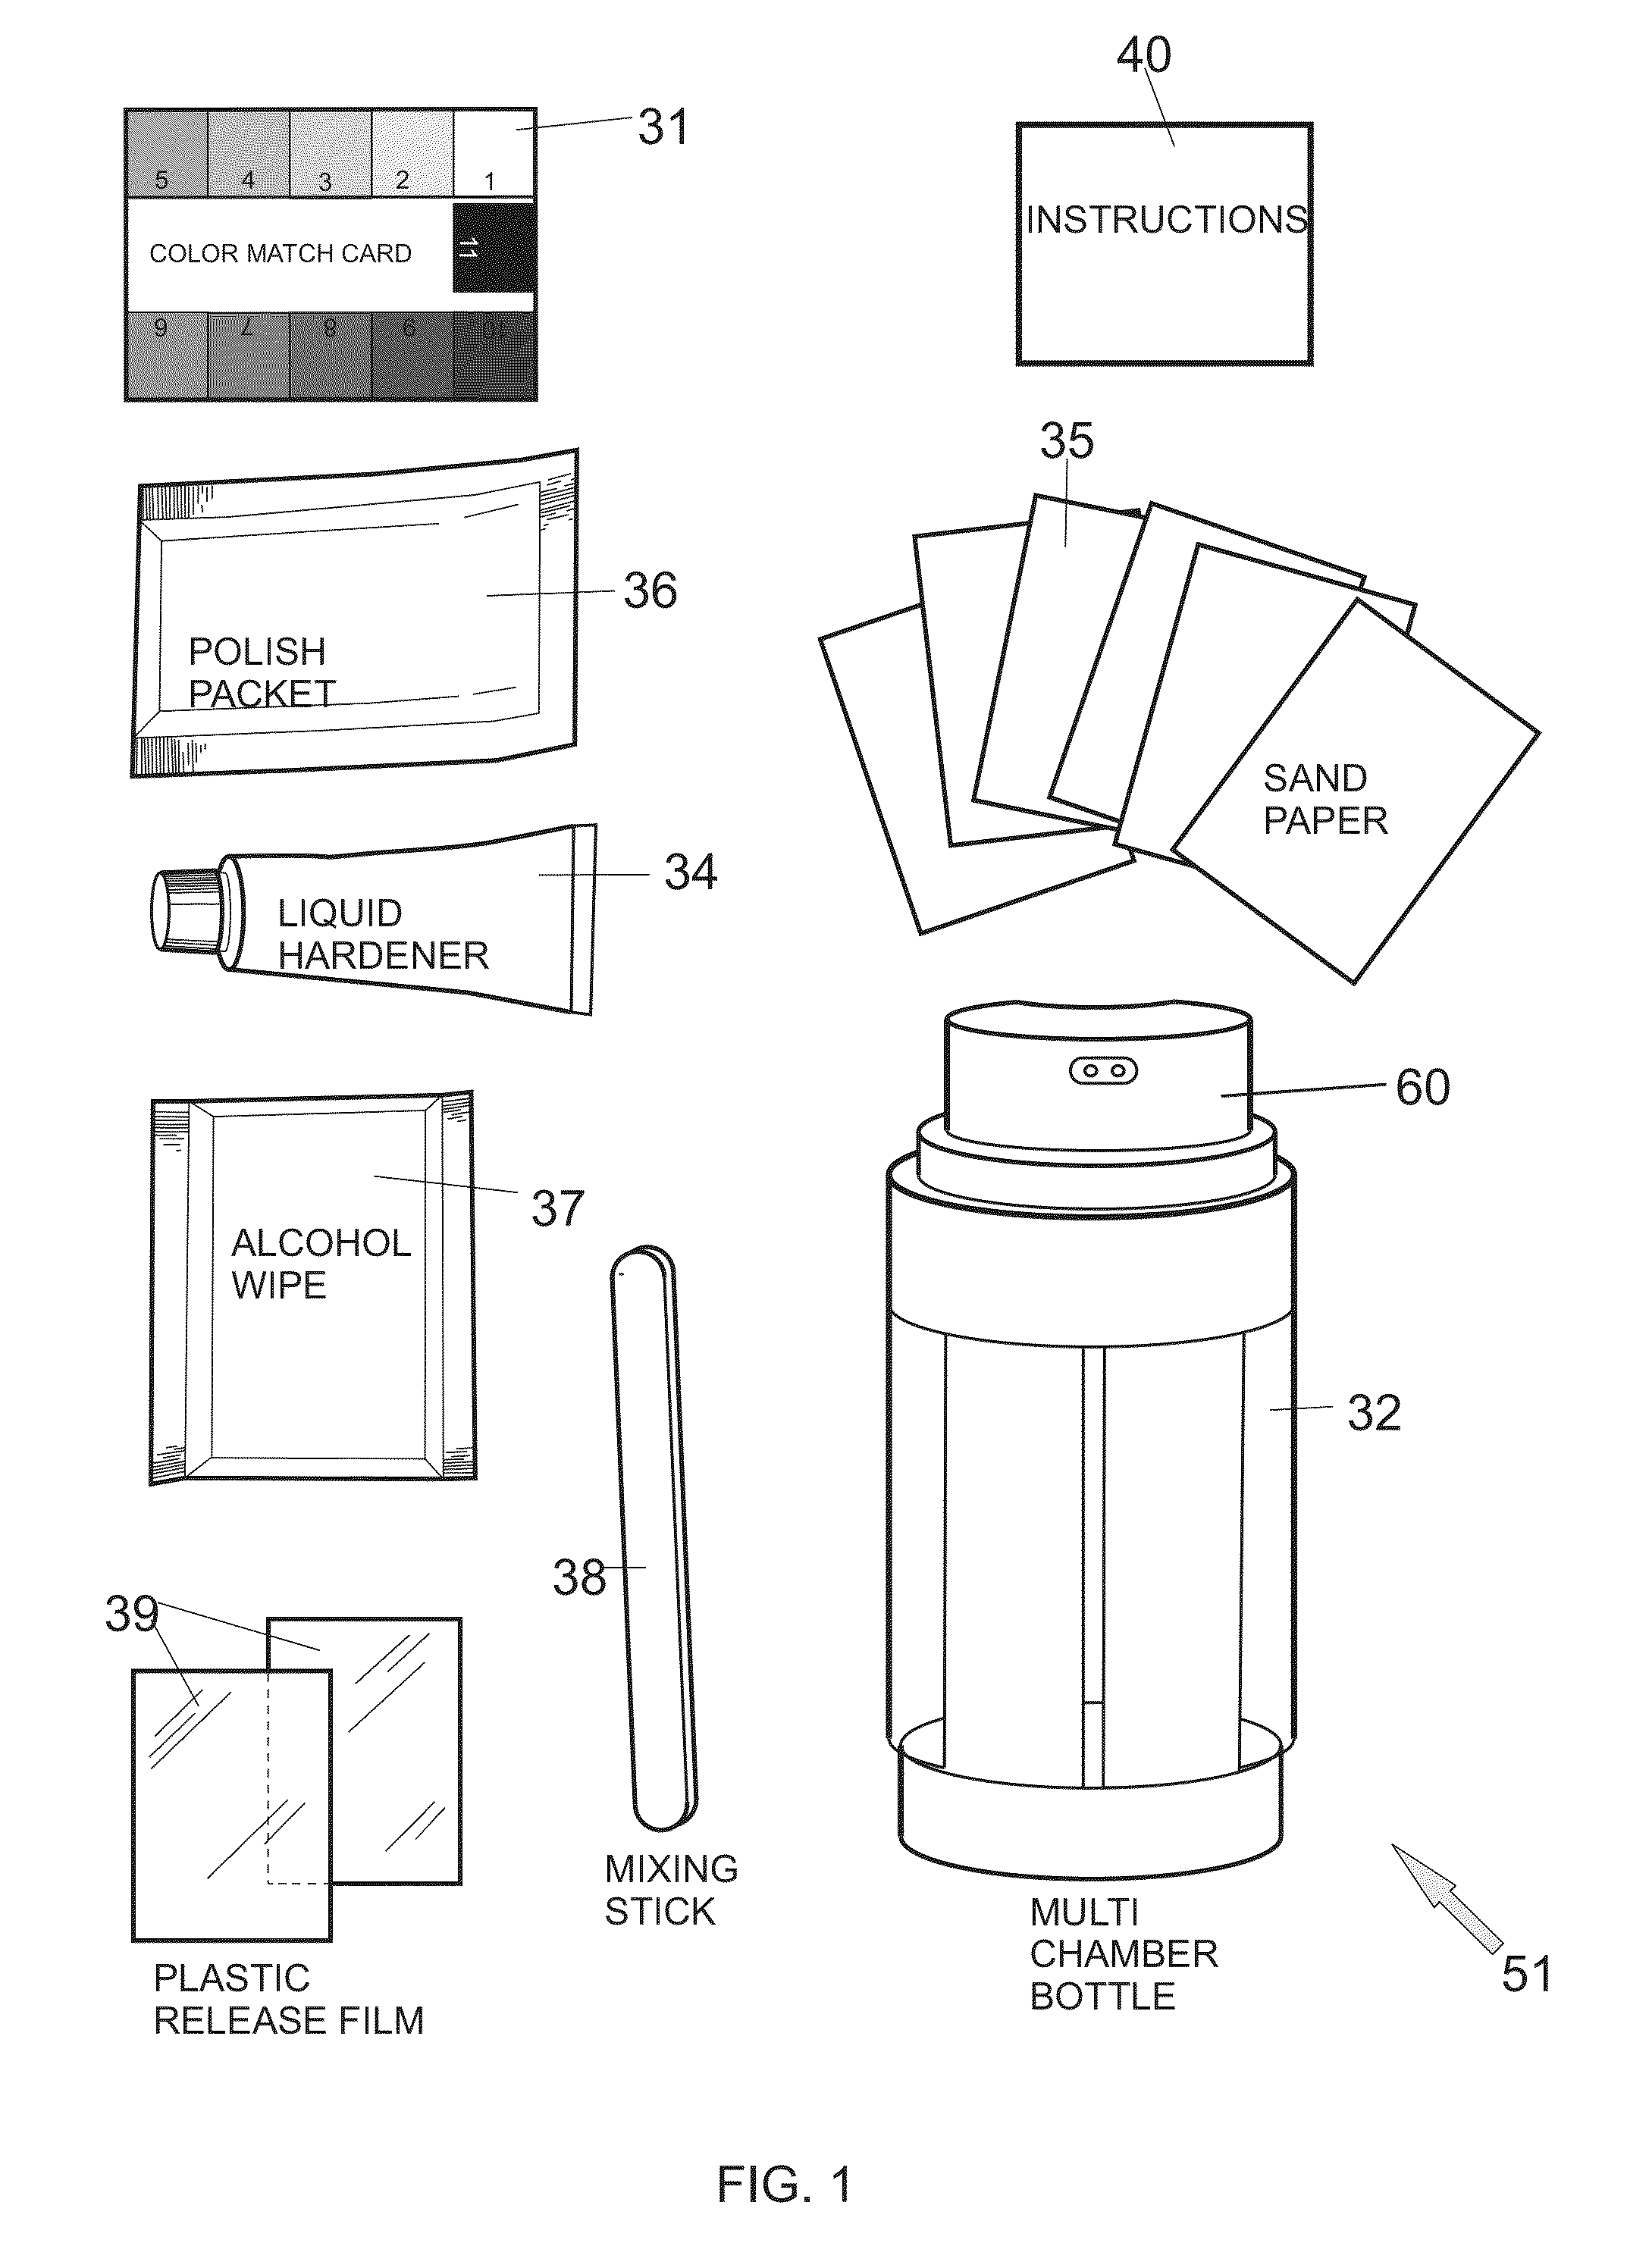 Fiberglass Gel Coat Color Match and Repair System and Method Utilizing a Multi Chamber Dispenser Device